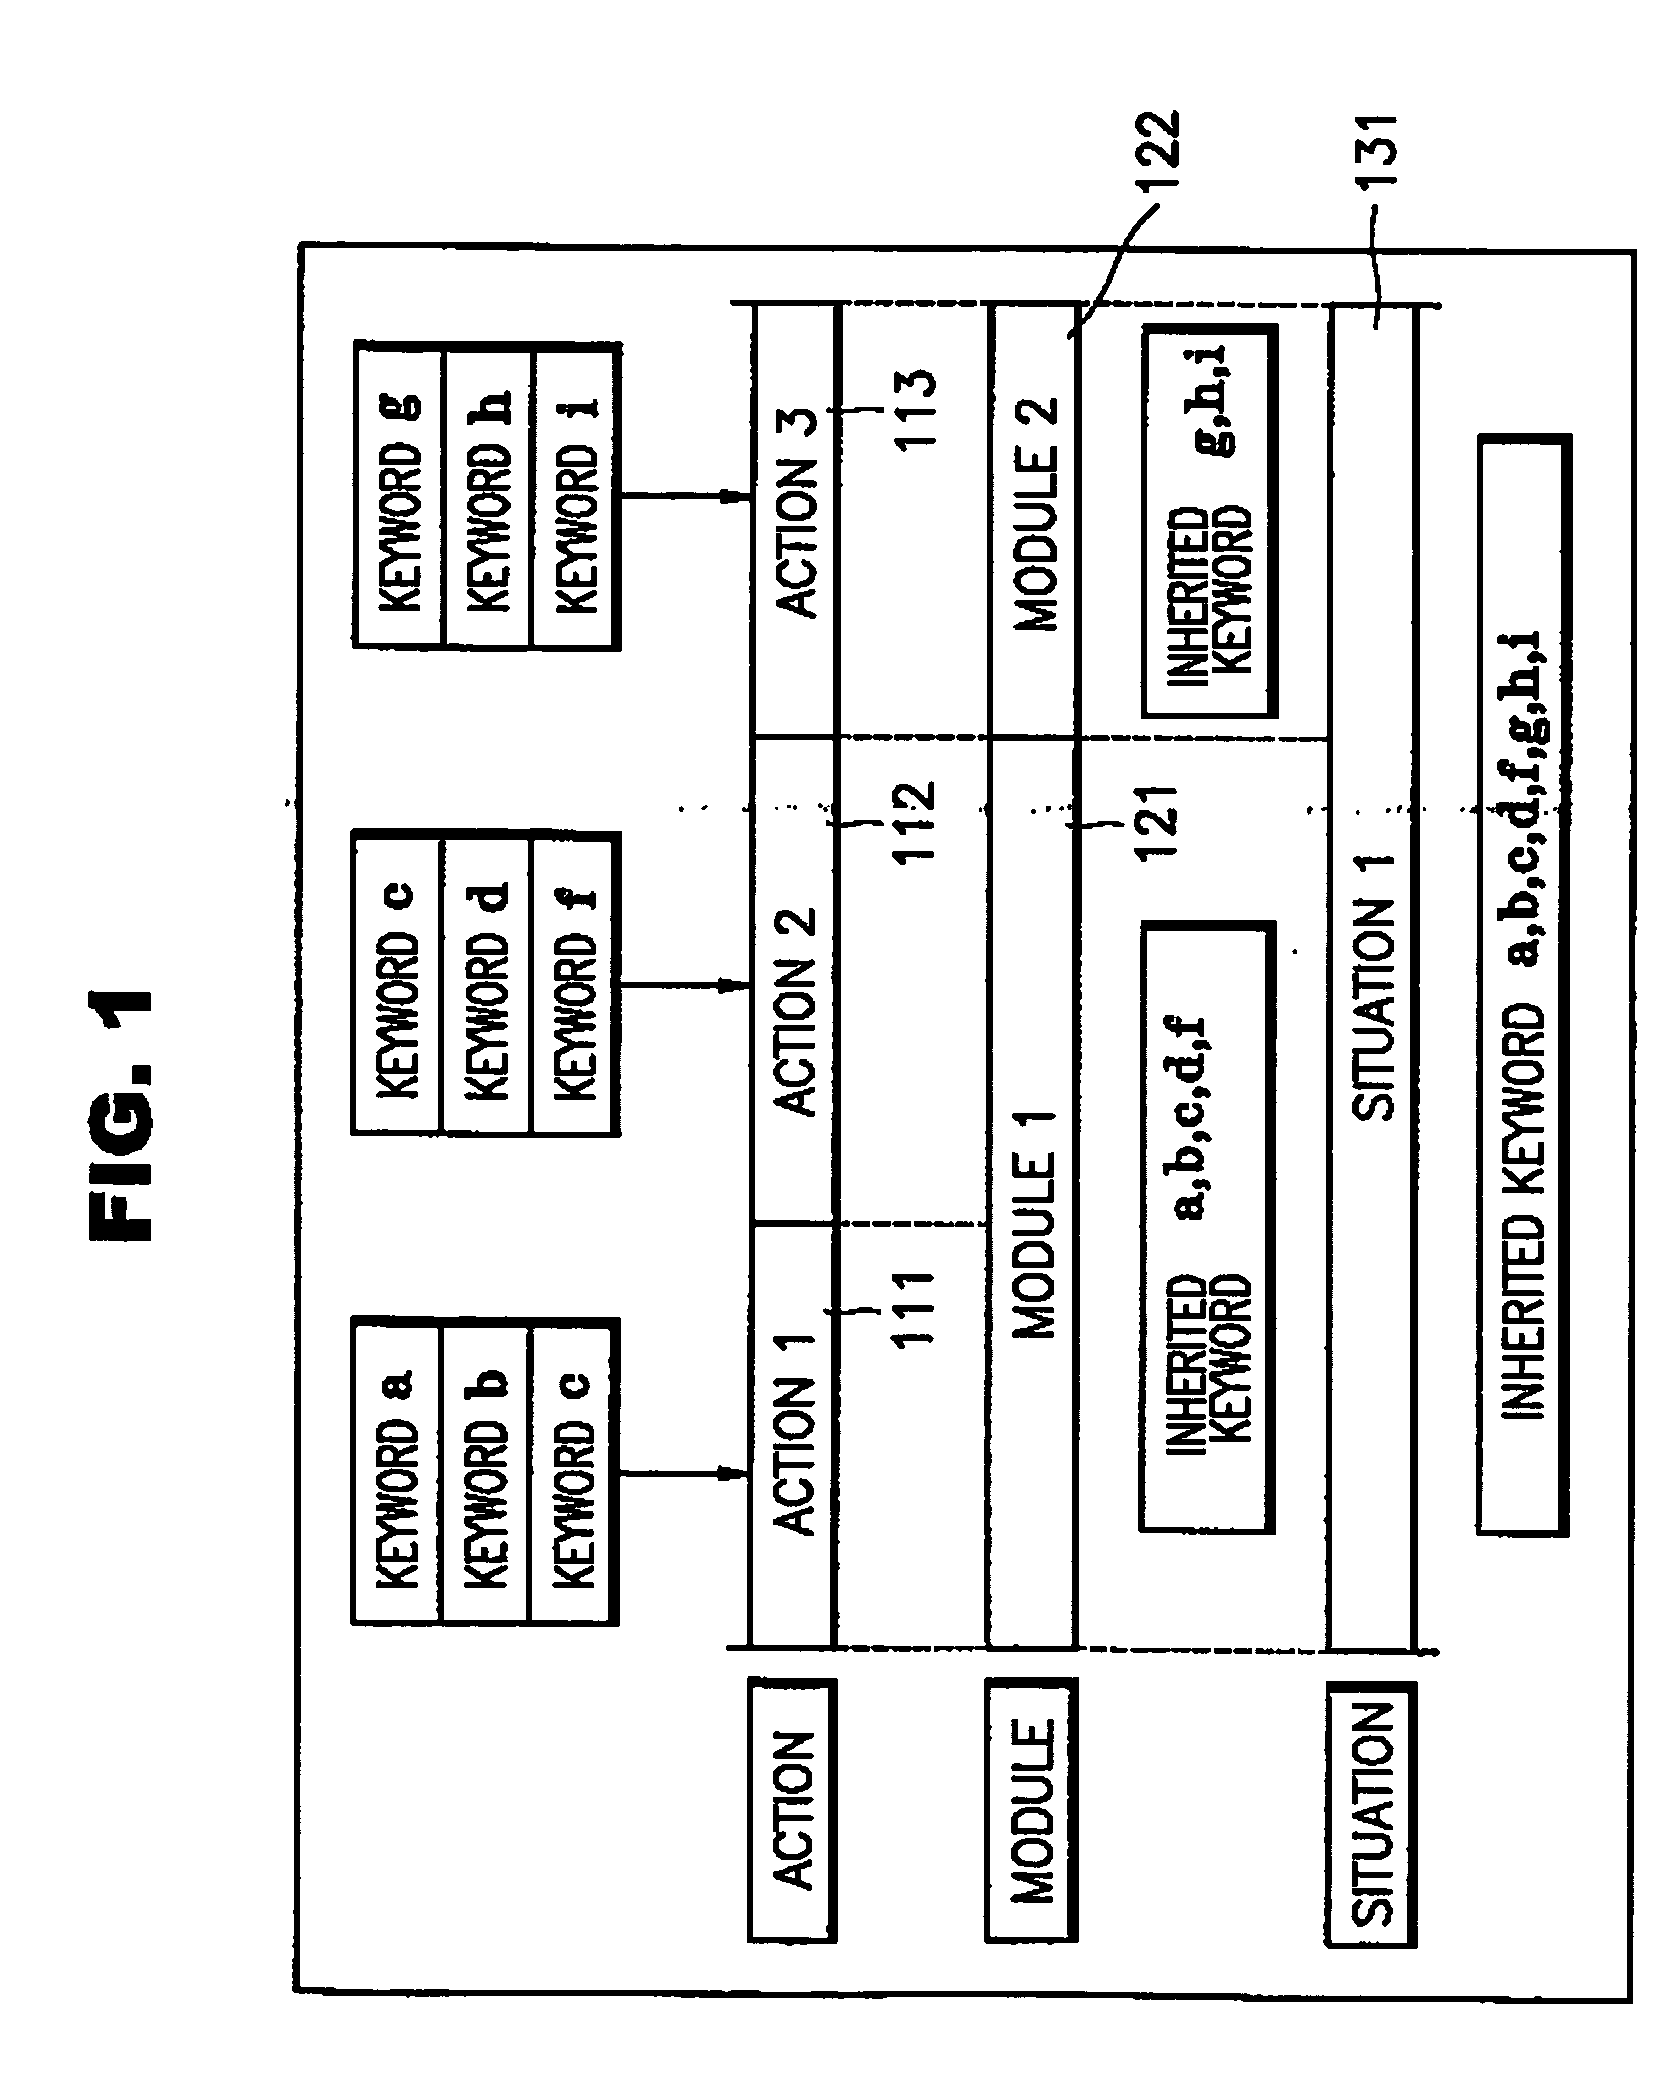 Methods for constructing multimedia database and providing mutimedia-search service and apparatus therefor